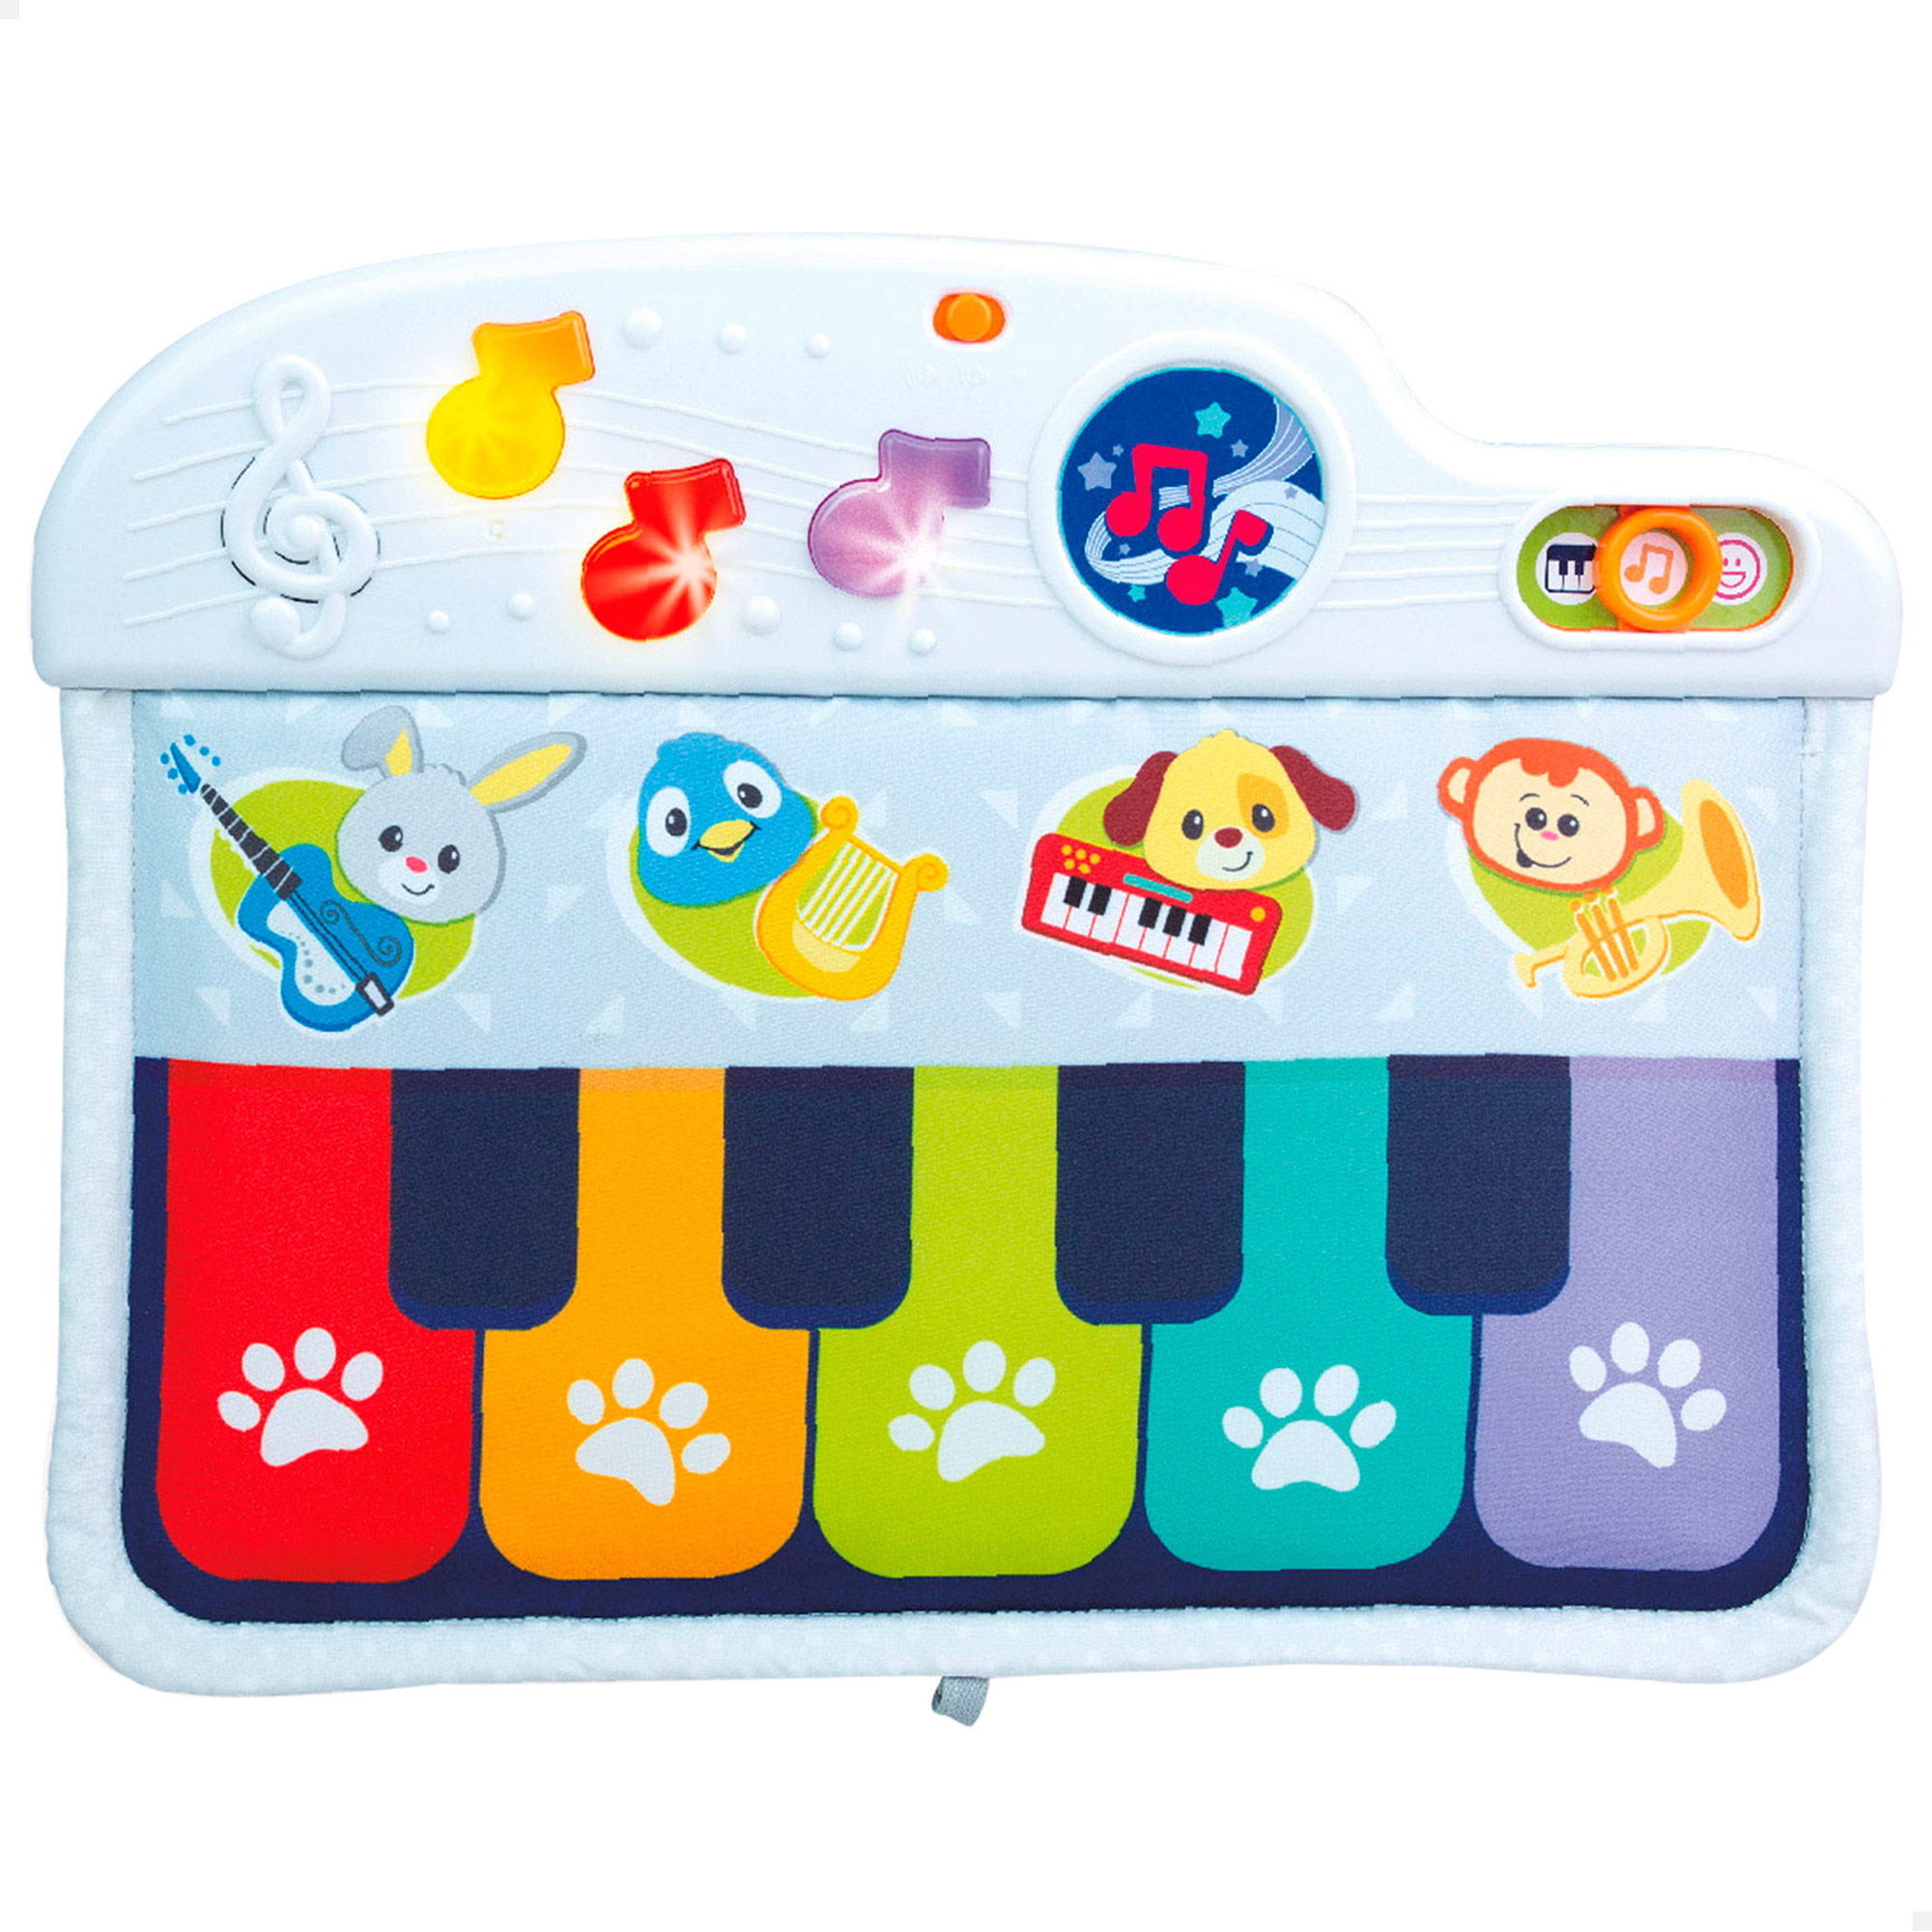 PIANO CUNA ANIMALES MELODIAS 46878 - N84722